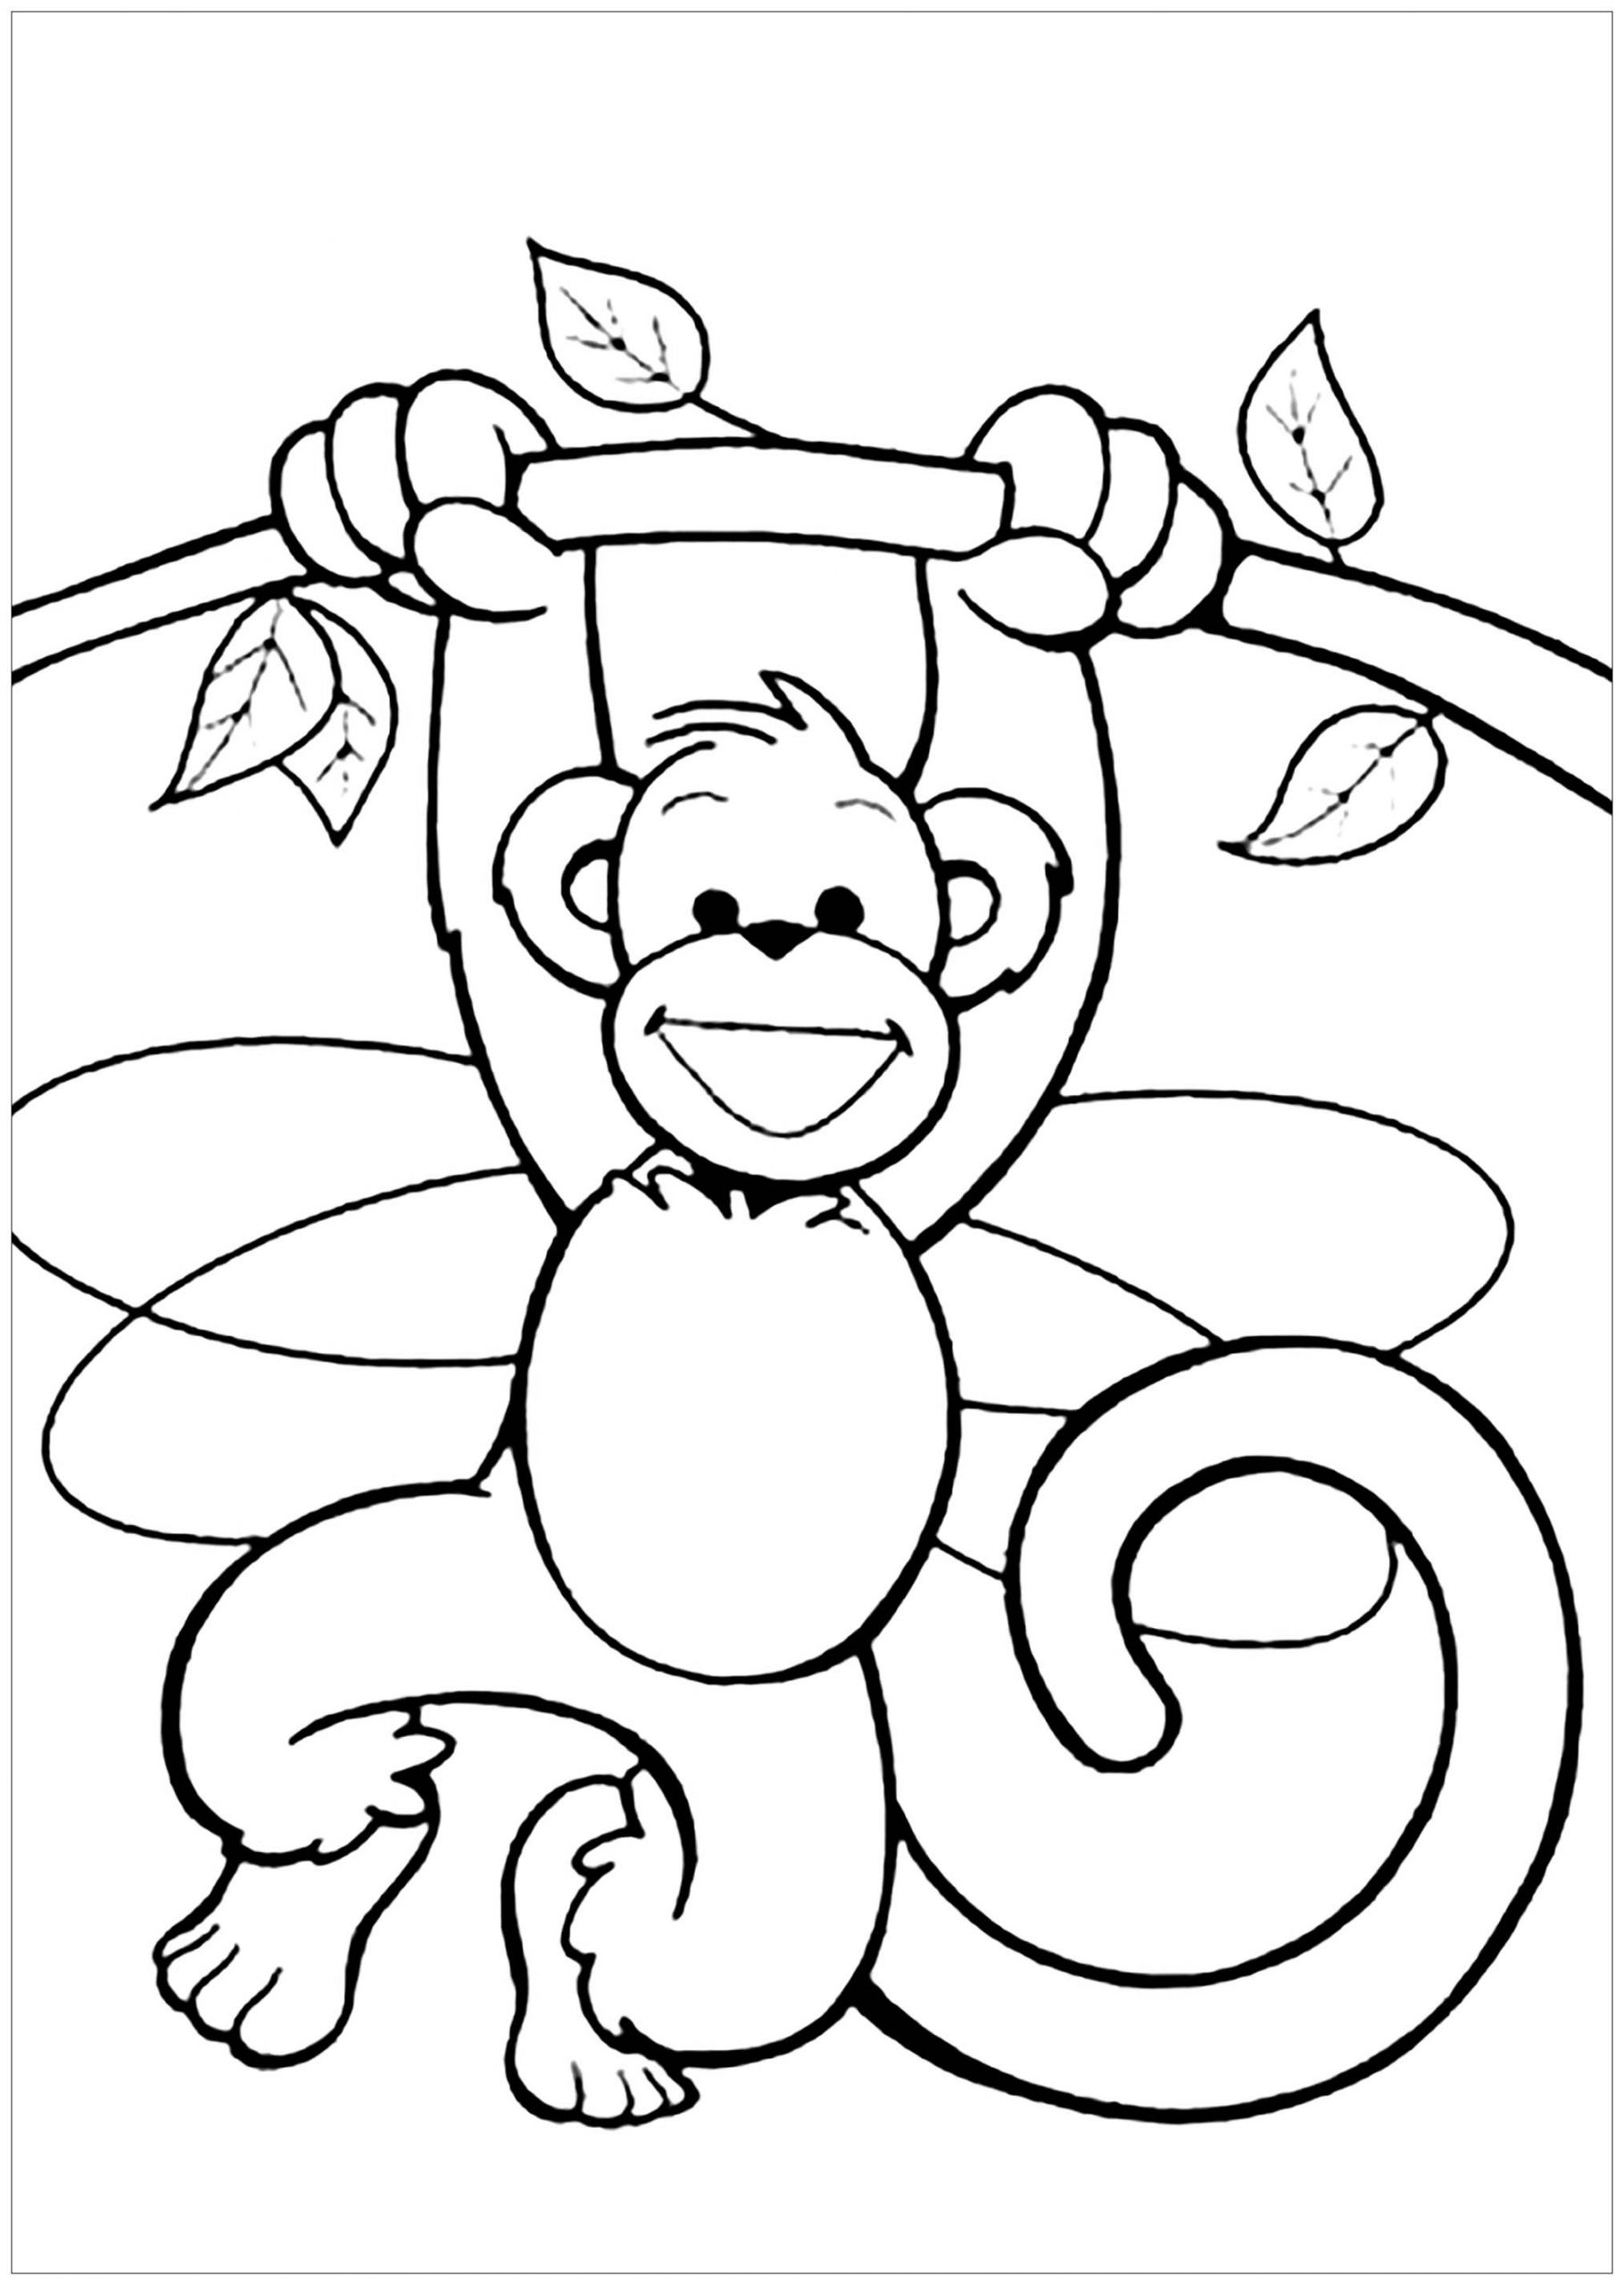 Coloring Sheets For Children
 Monkeys to for free Monkeys Kids Coloring Pages